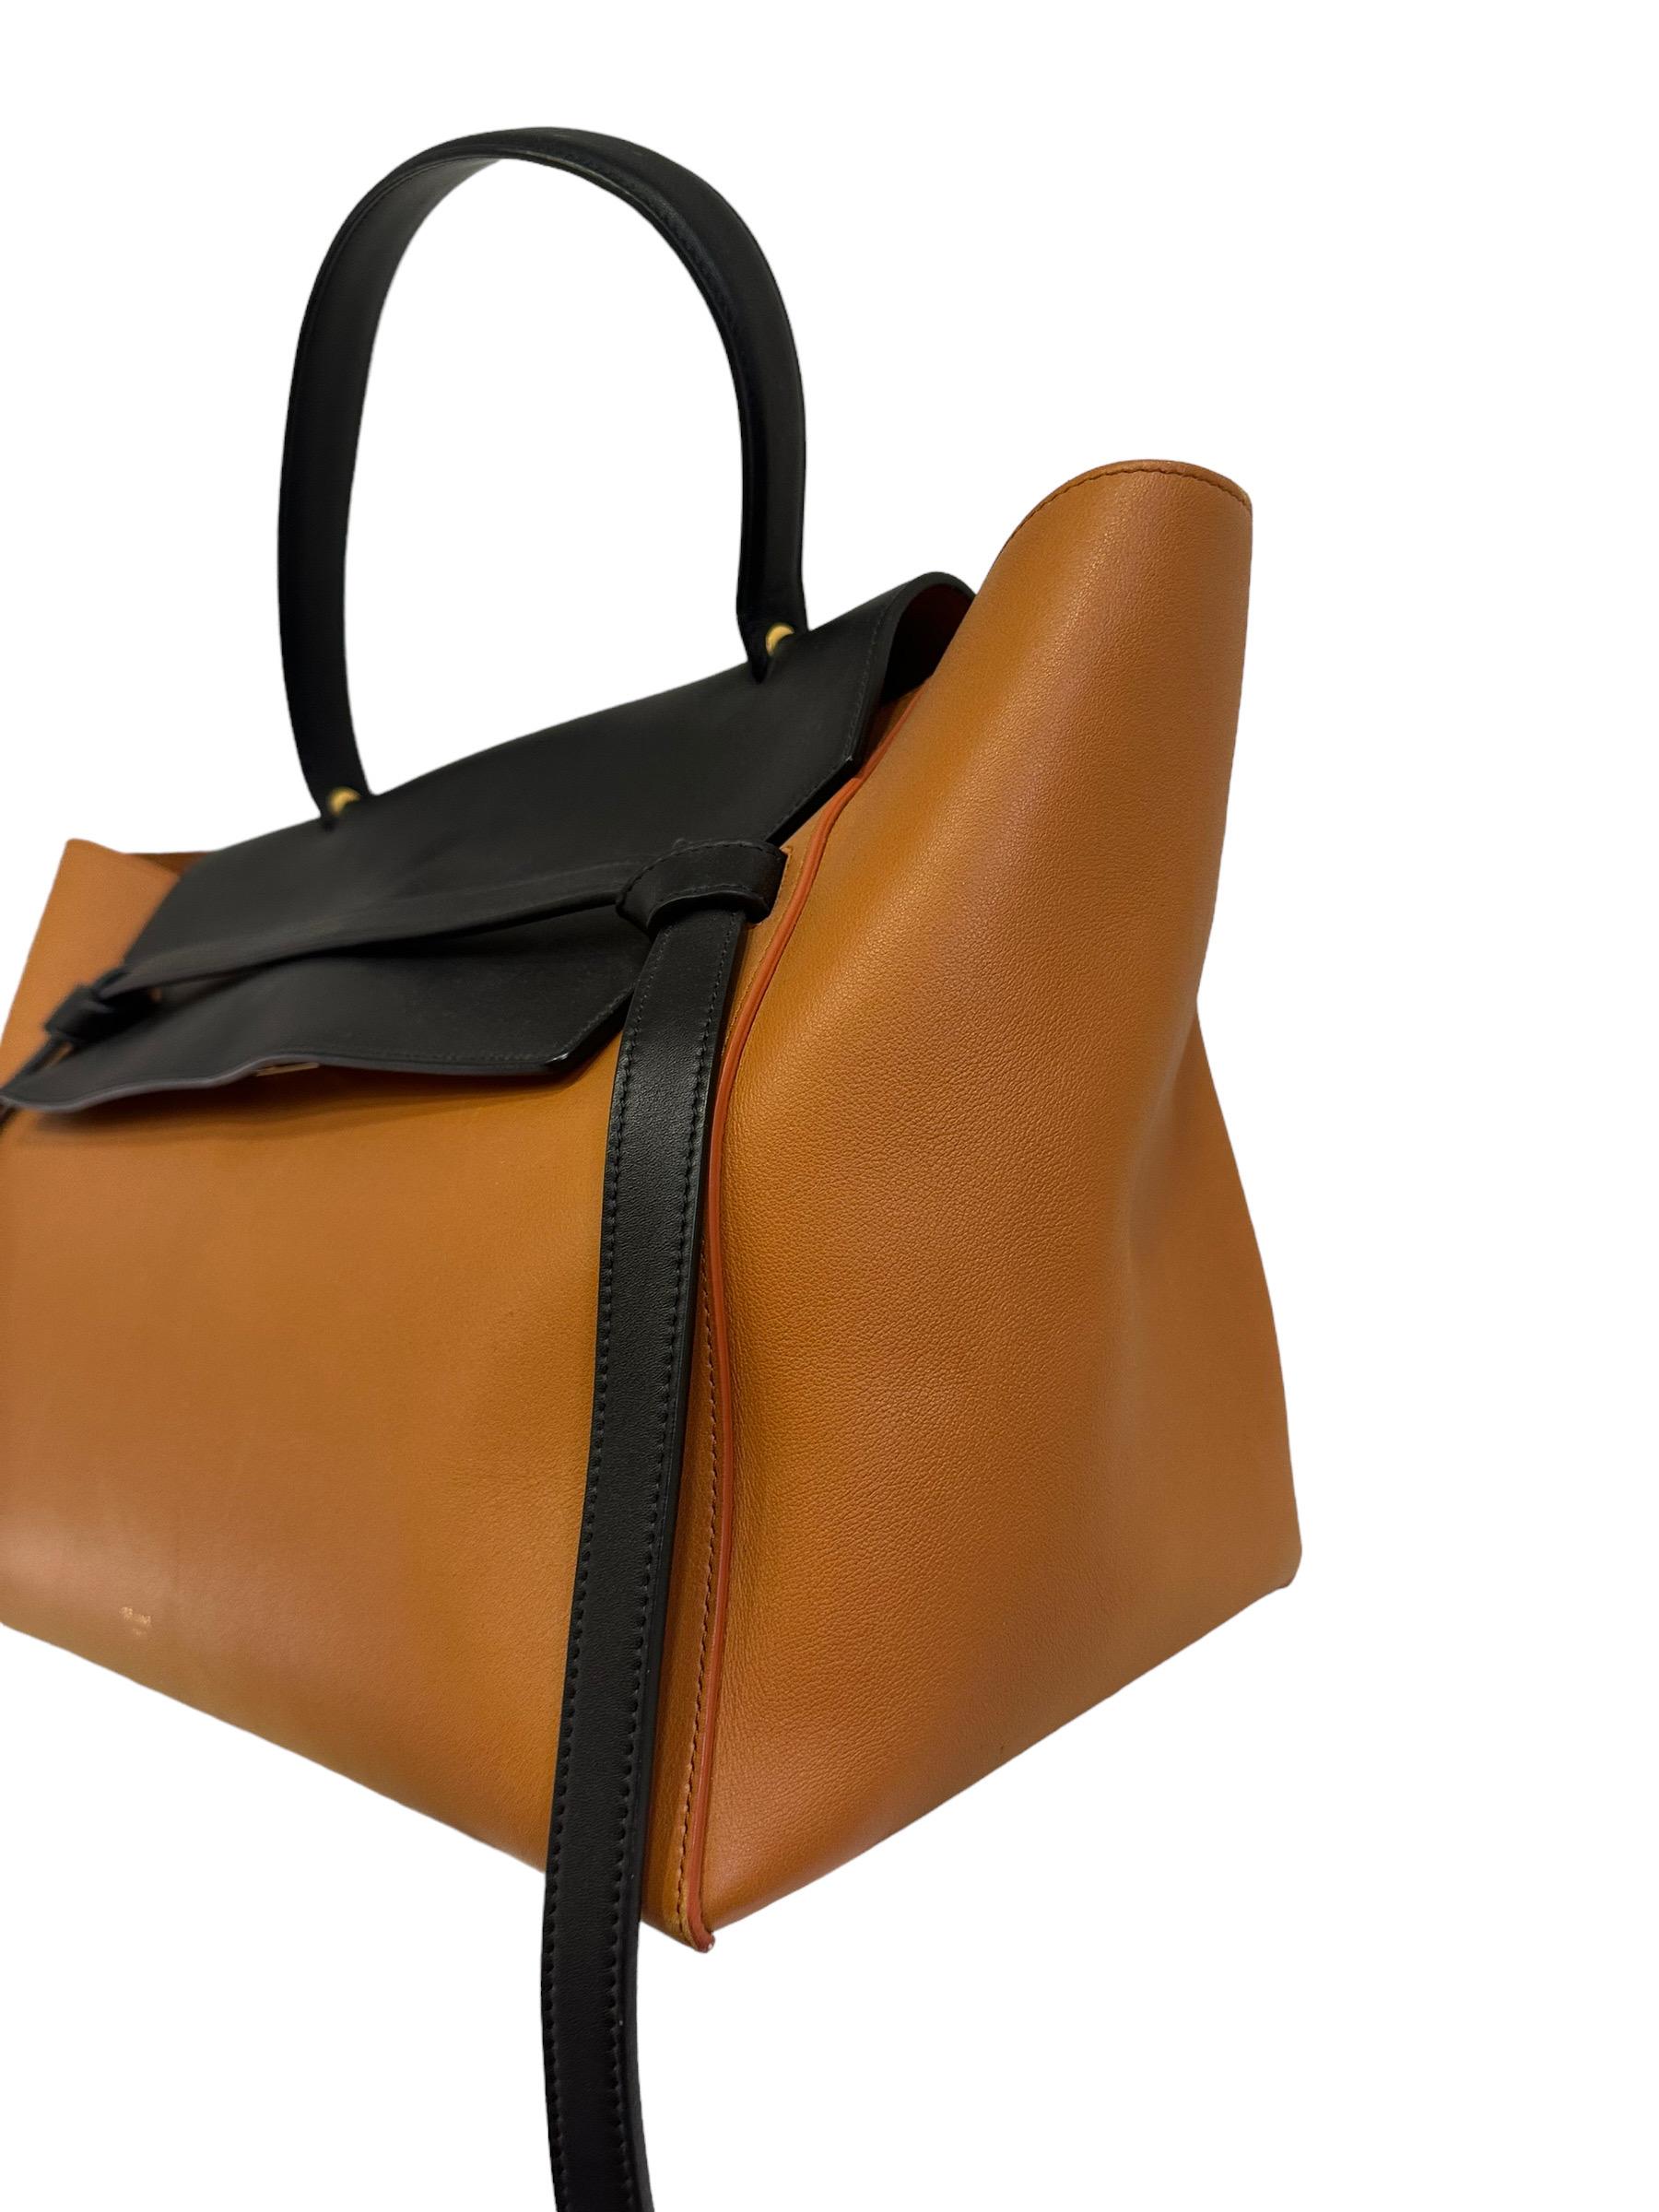 Bag by Celine, Belt model, made in two-tone black and orange leather with gold hardware. Equipped with a central handle in black leather, internally lined in dark orange suede, very roomy. Equipped with a flap with interlocking closure, an external